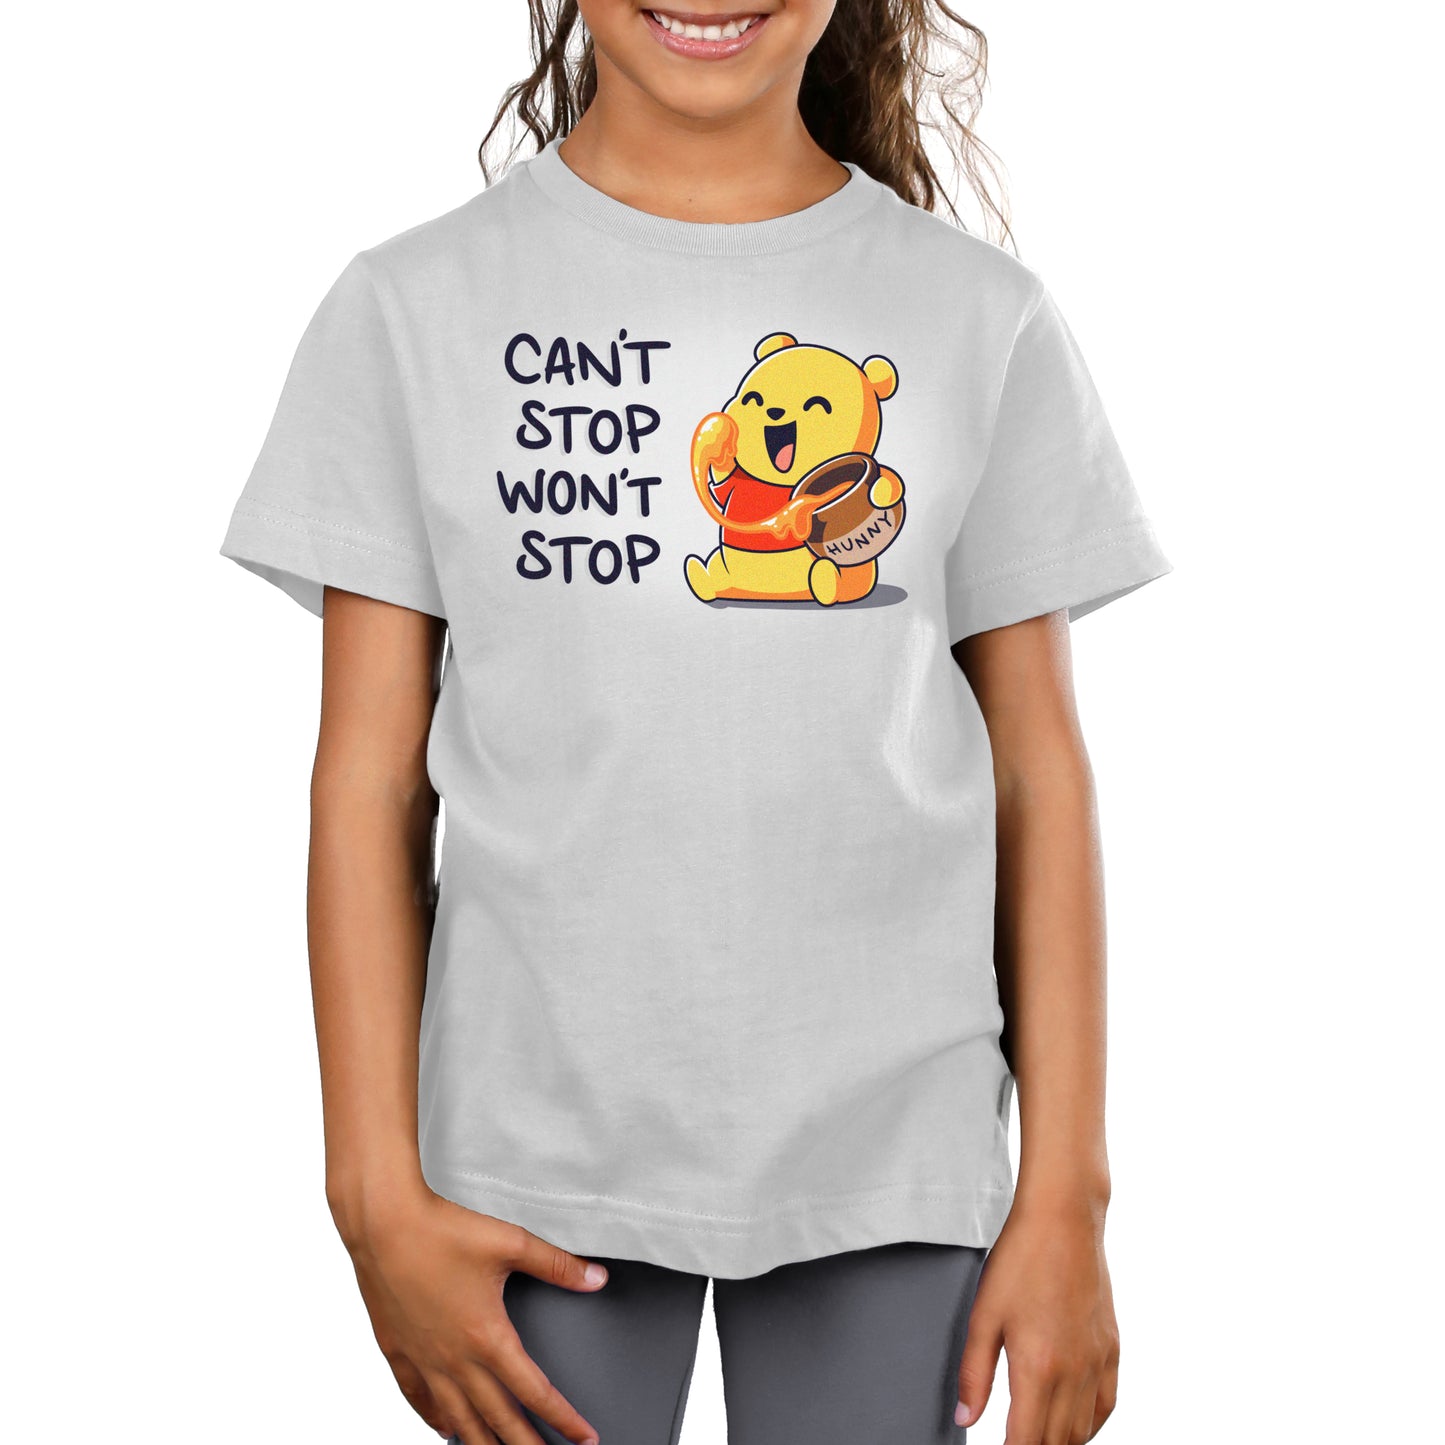 Officially licensed Can't Stop. Won't Stop. Winnie The Pooh kids Disney t-shirt.